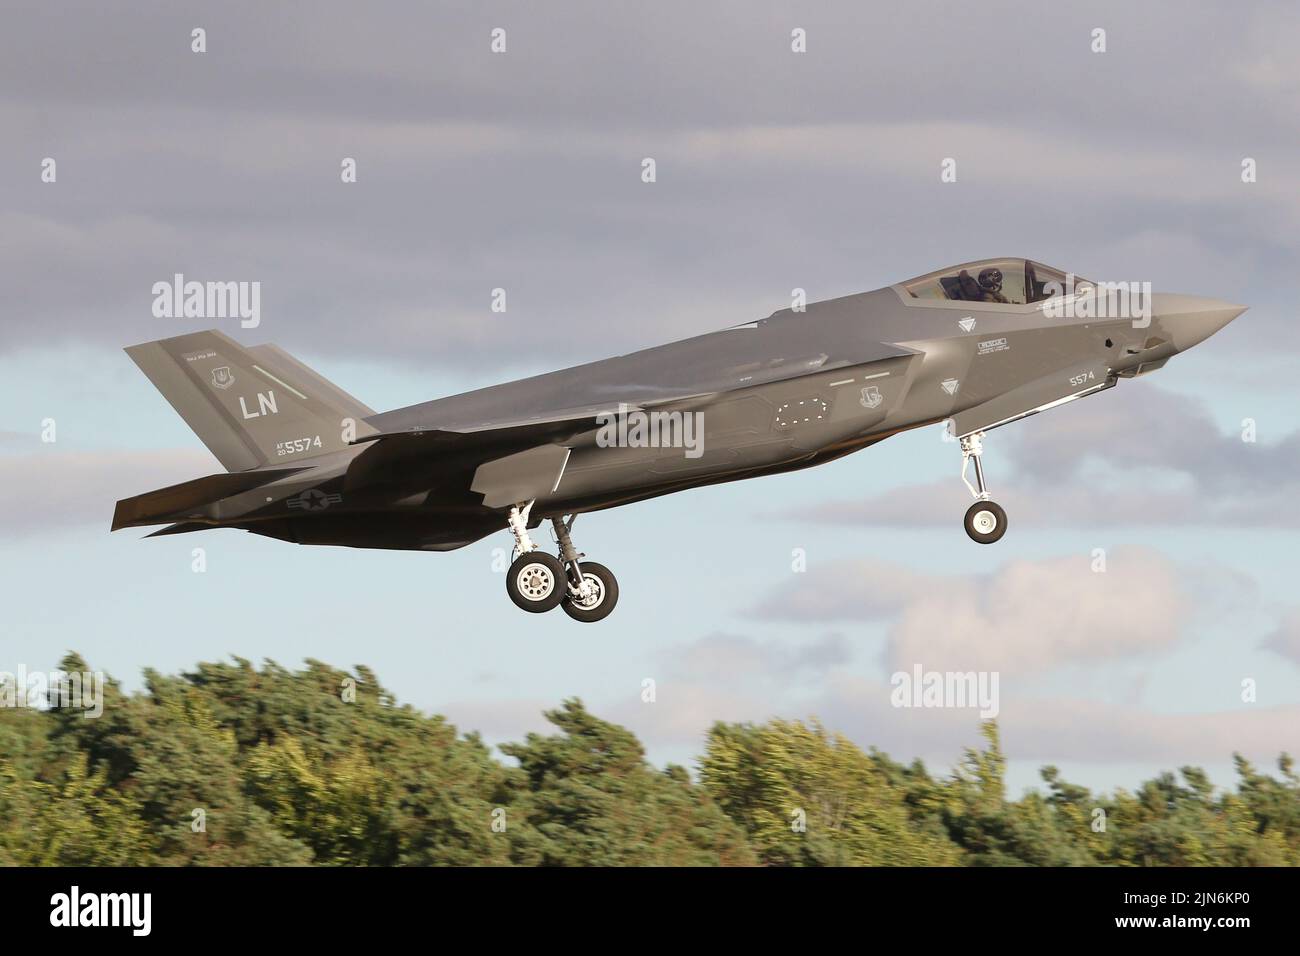 Lockheed Martin F-35A Lightning II strike fighters from the 495th Fighter Squadron returning to RAF Lakenheath, Suffolk after a local evening flight. Stock Photo